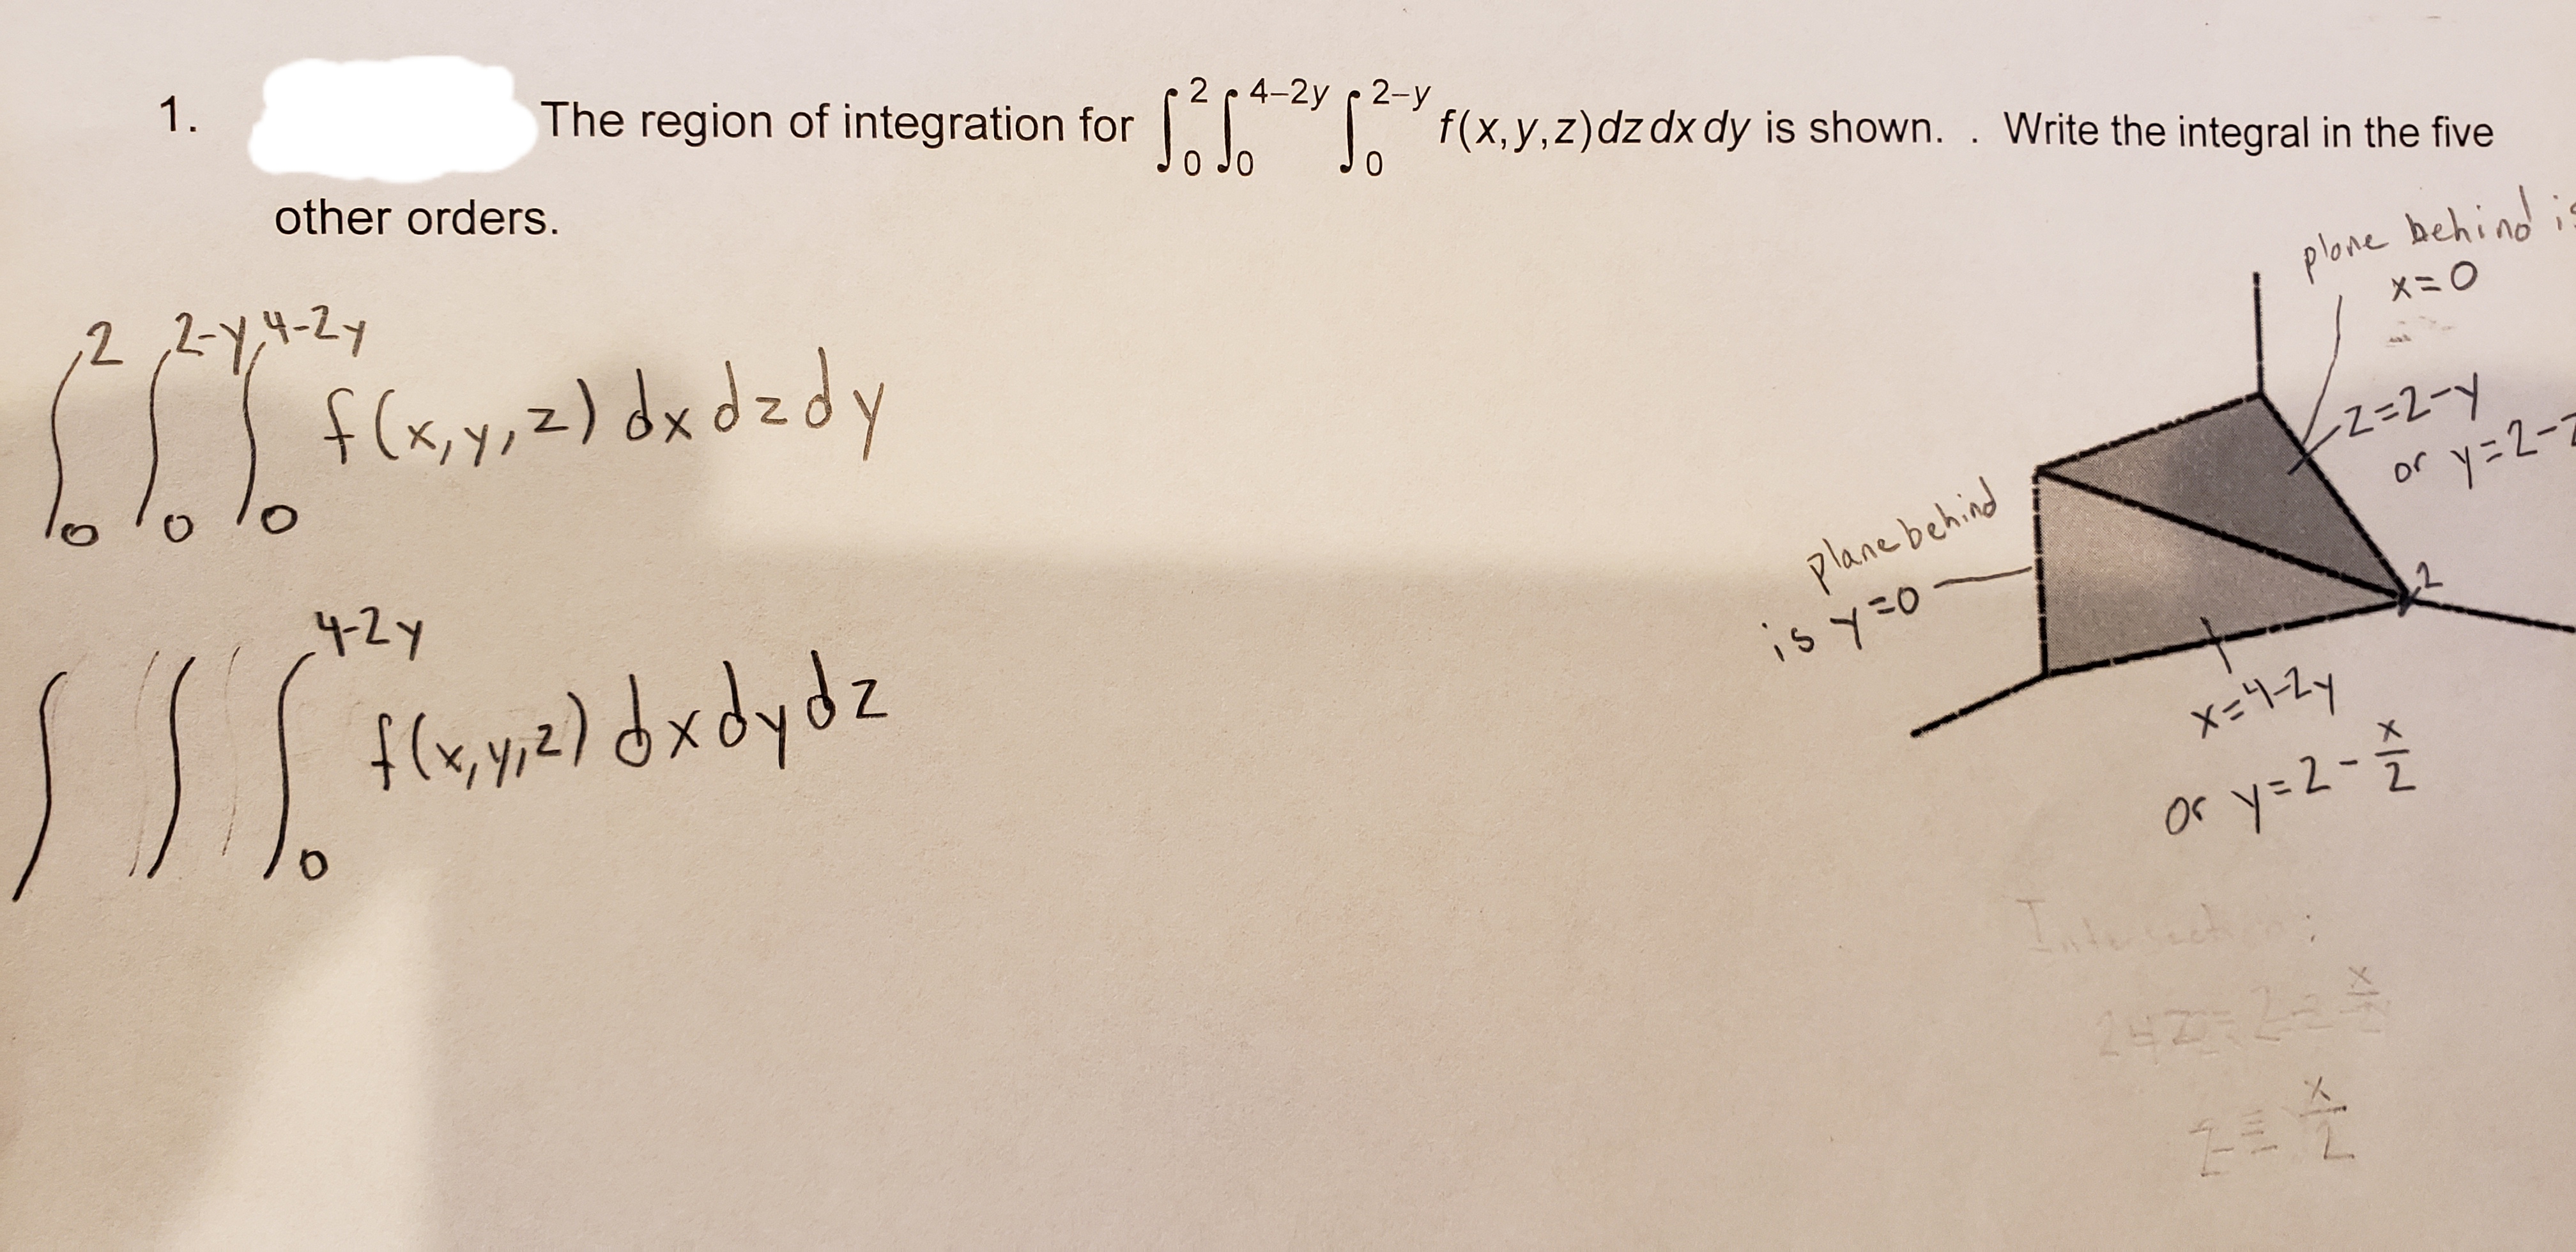 1.
The region of integration for f(x, y, z) dz dx dy is shown.. Write the integral in the five
other orders.
212-y
0 JO
22-1-27
0
f(x,y,z)dxdzd
plore behind
XO
42Y
Z-2-y
y 2-
Plane behind
is yO
f(yyz)dxdydz
or
x-1-29
or y=2-
T.
1 2
